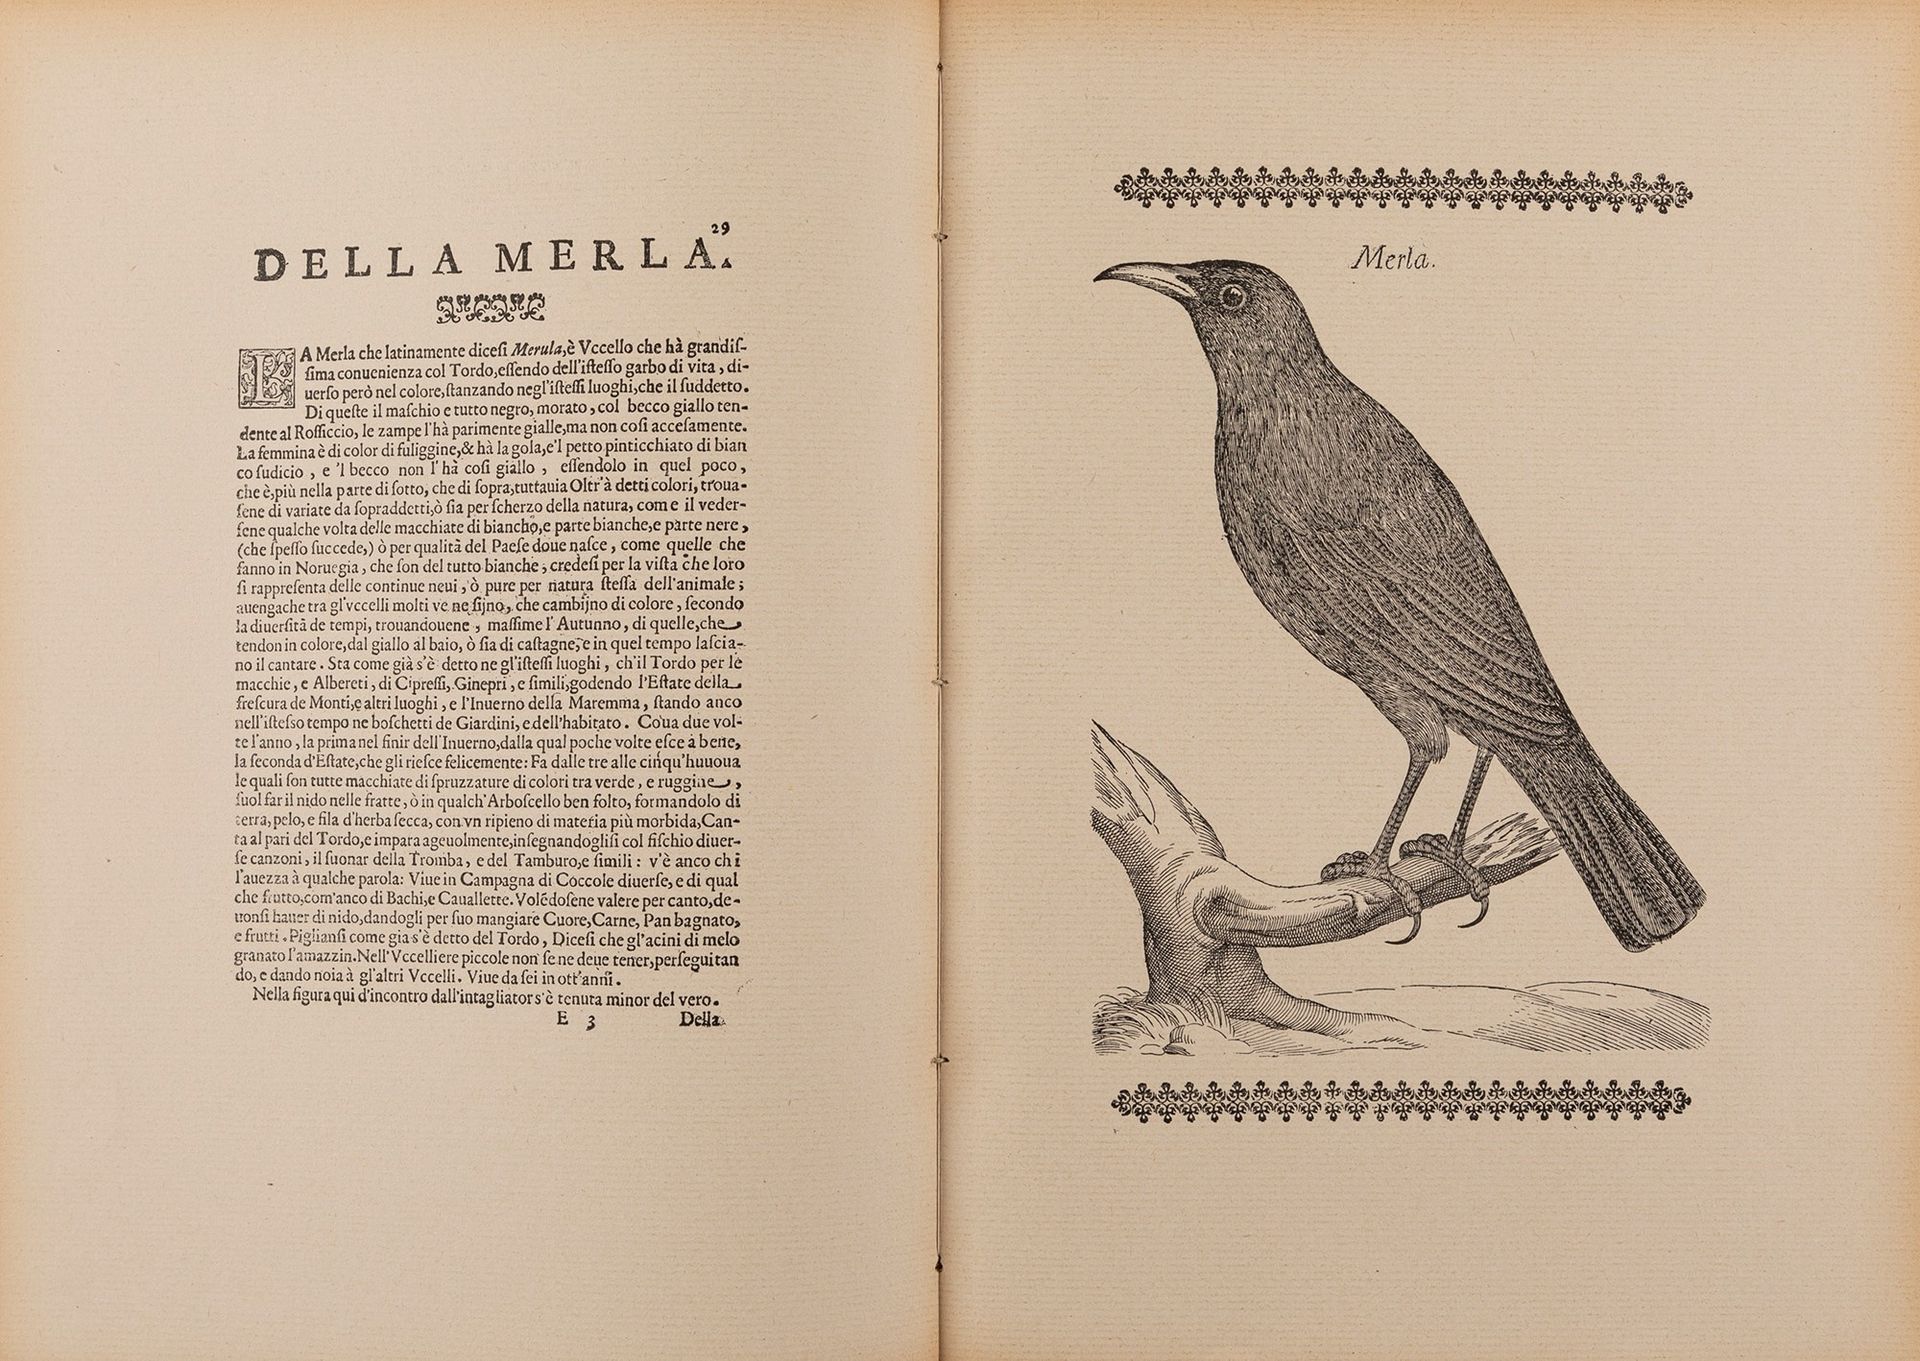 Null Aviary or speech of nature

Bologna, Printing Company, 1930. 344 x 250 mm. &hellip;